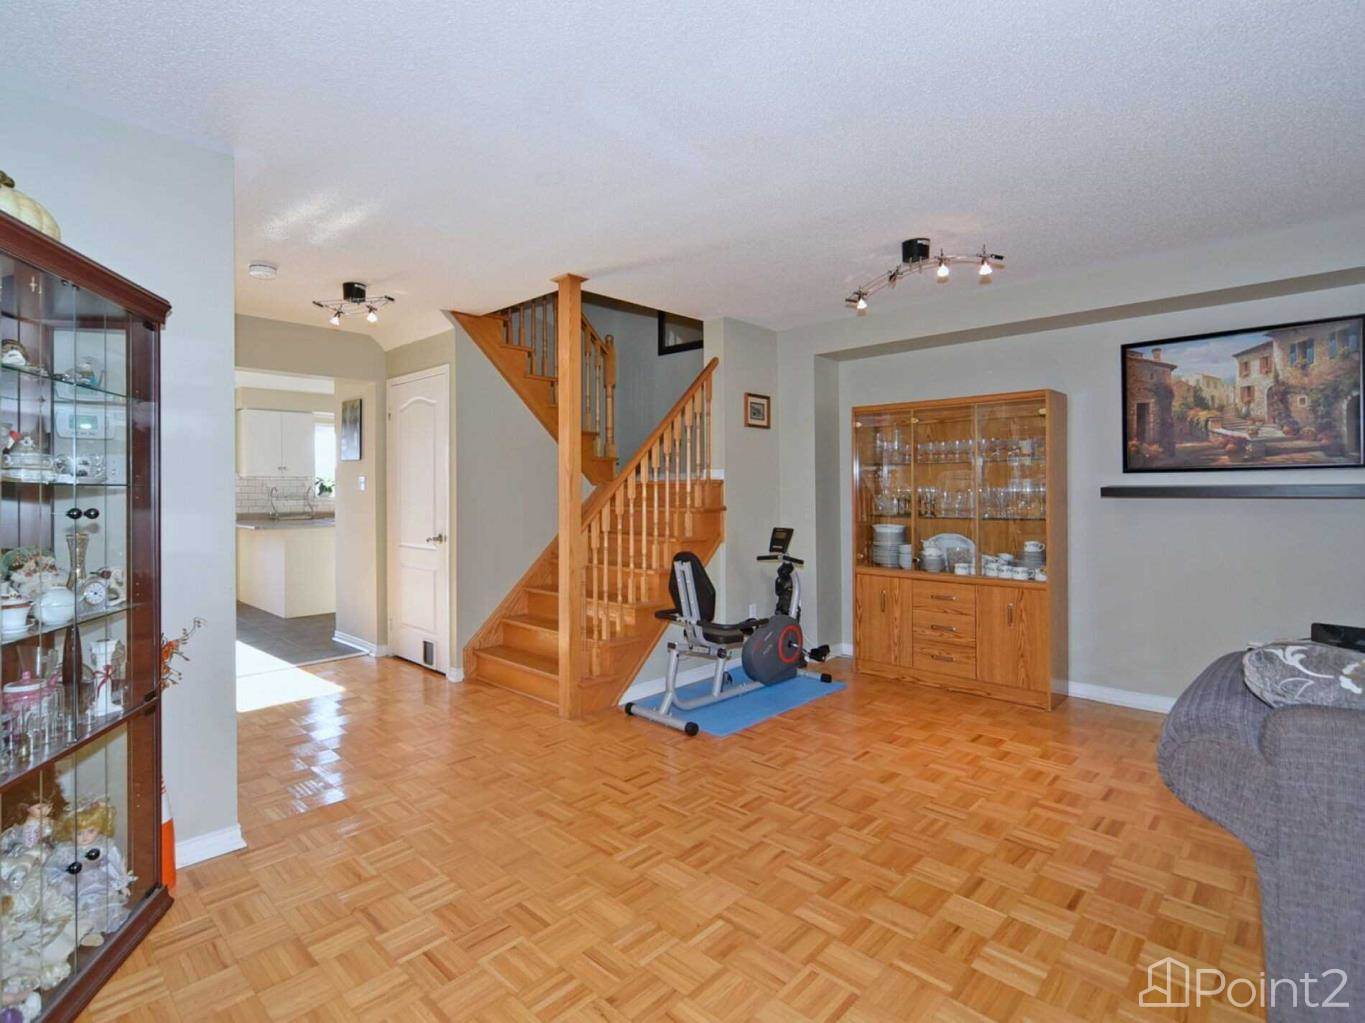 19 Foxchase Ave Vaughan Ontario L 4 L 9 N 1, Vaughan, ON L4L9N1 Photo 4